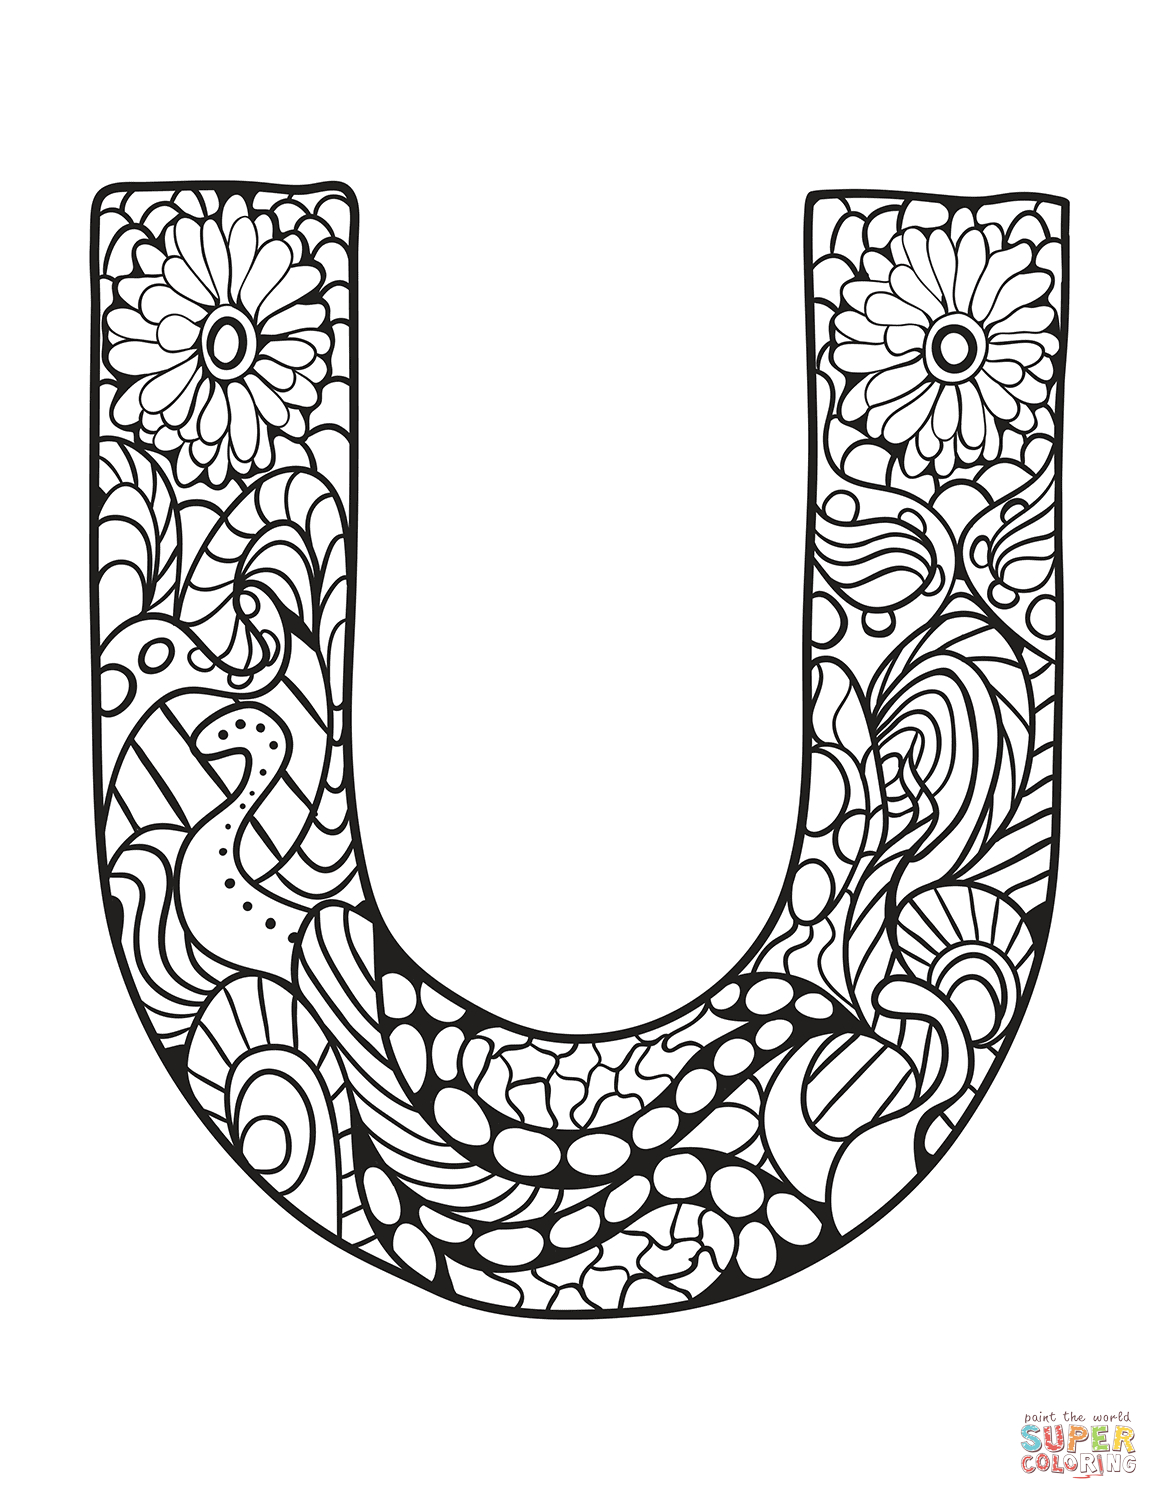 Letter U Zentangle Coloring Page | Free Printable Coloring Pages - Free Printable Letter U Coloring Pages